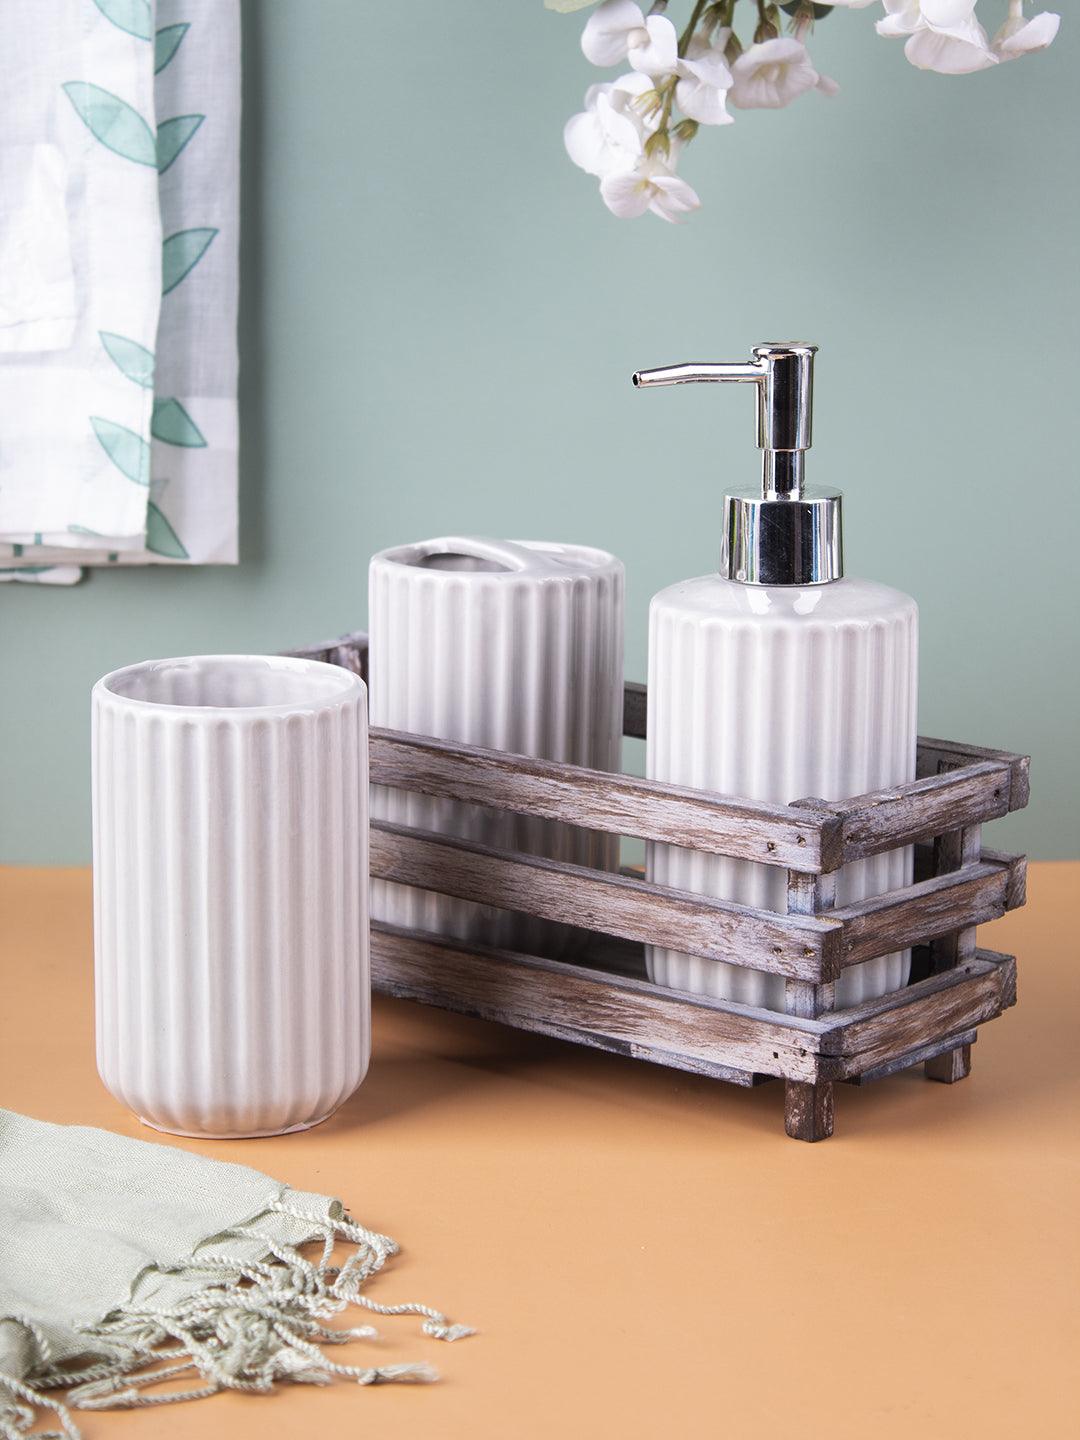 Market99 Bathroom Set, Rust Proof Chrome Finish, with Wooden Top, White, Ceramic - MARKET 99